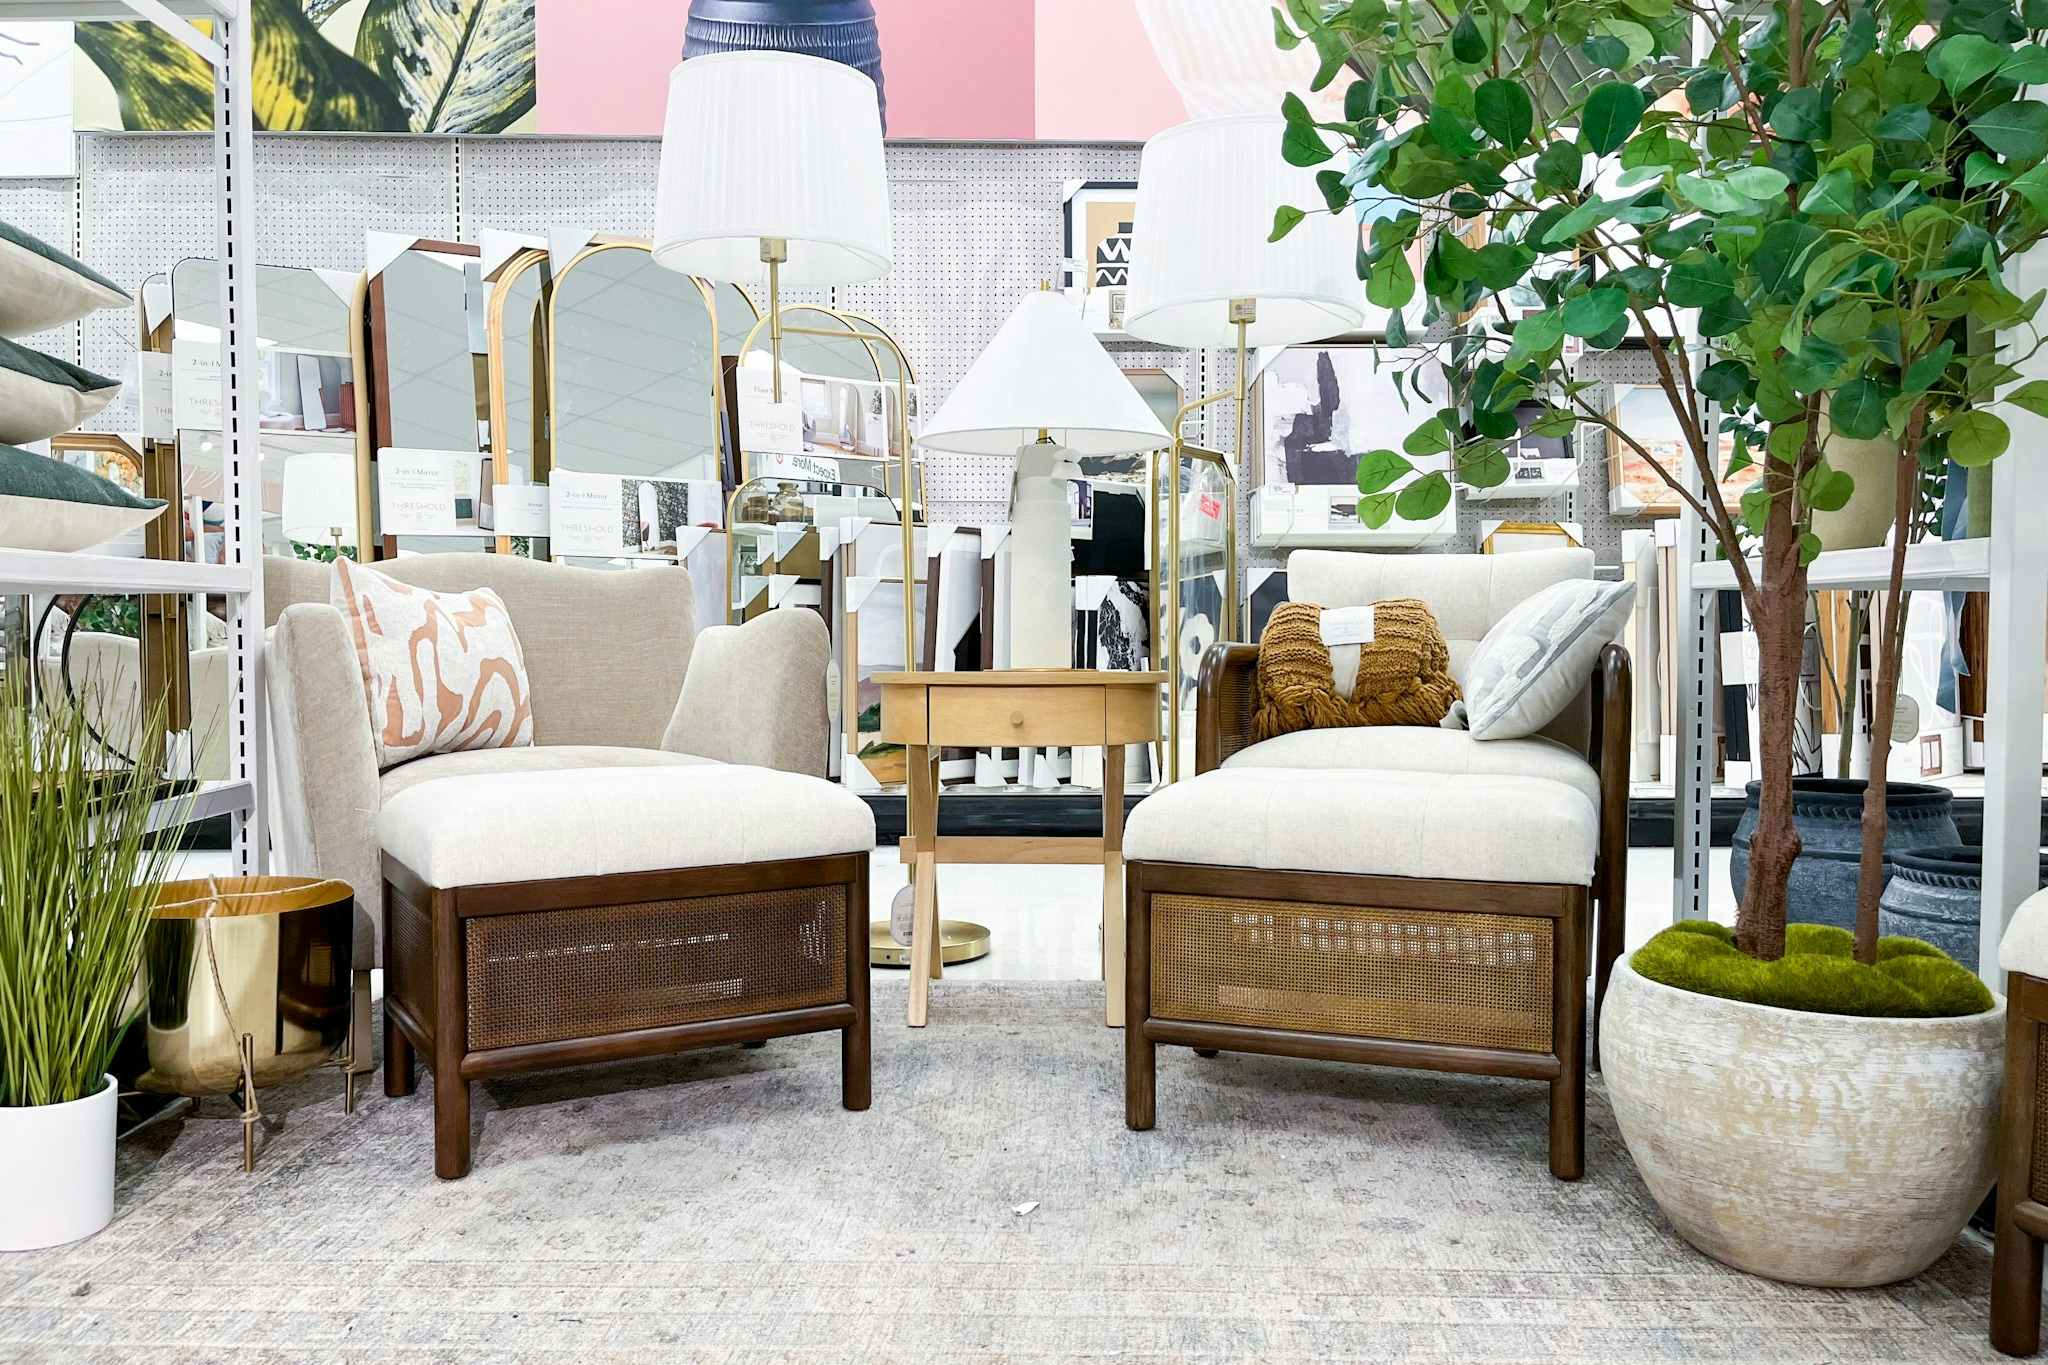 Huge Target Furniture Sale for 50% Off: Studio McGee, Threshold, and More